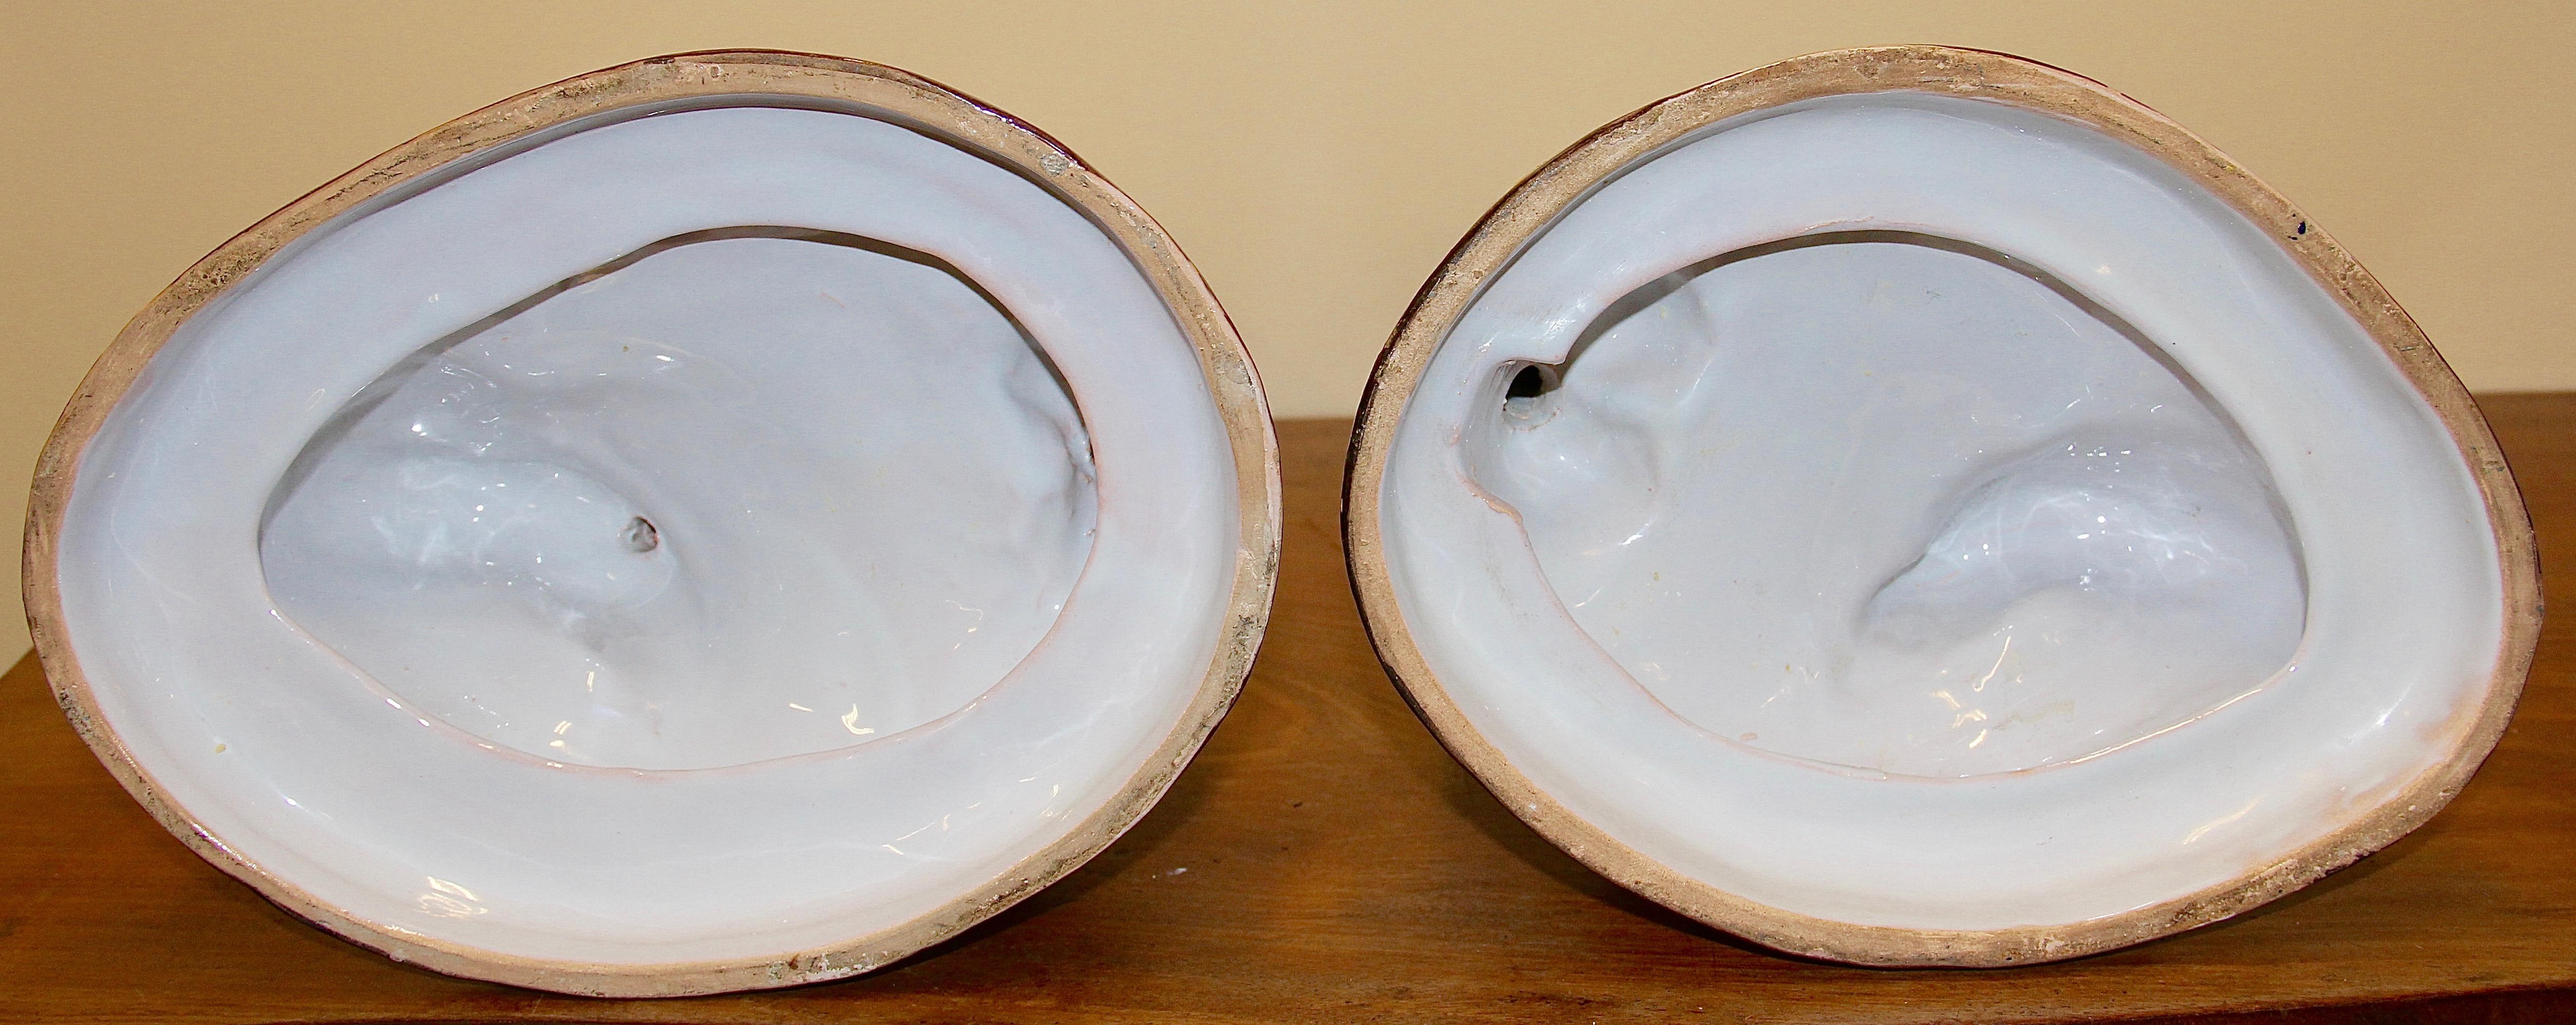 Pair of Galle a Nancy St. Clement Faience Candleholders, 19th Century For Sale 6